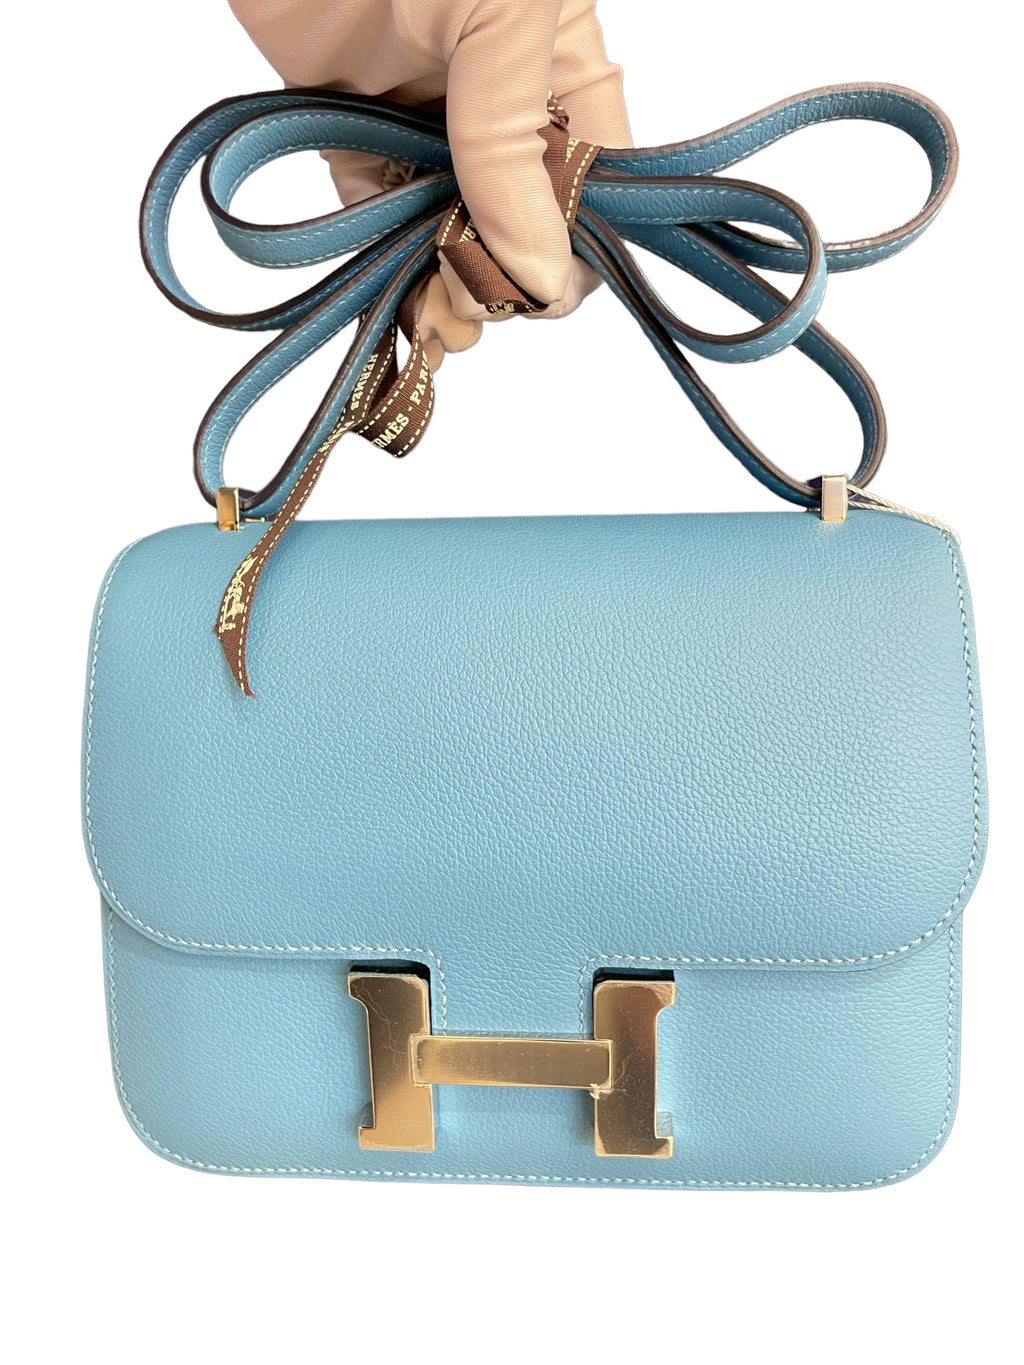 Constance Mini Blue Atoll - Bags Of Luxury